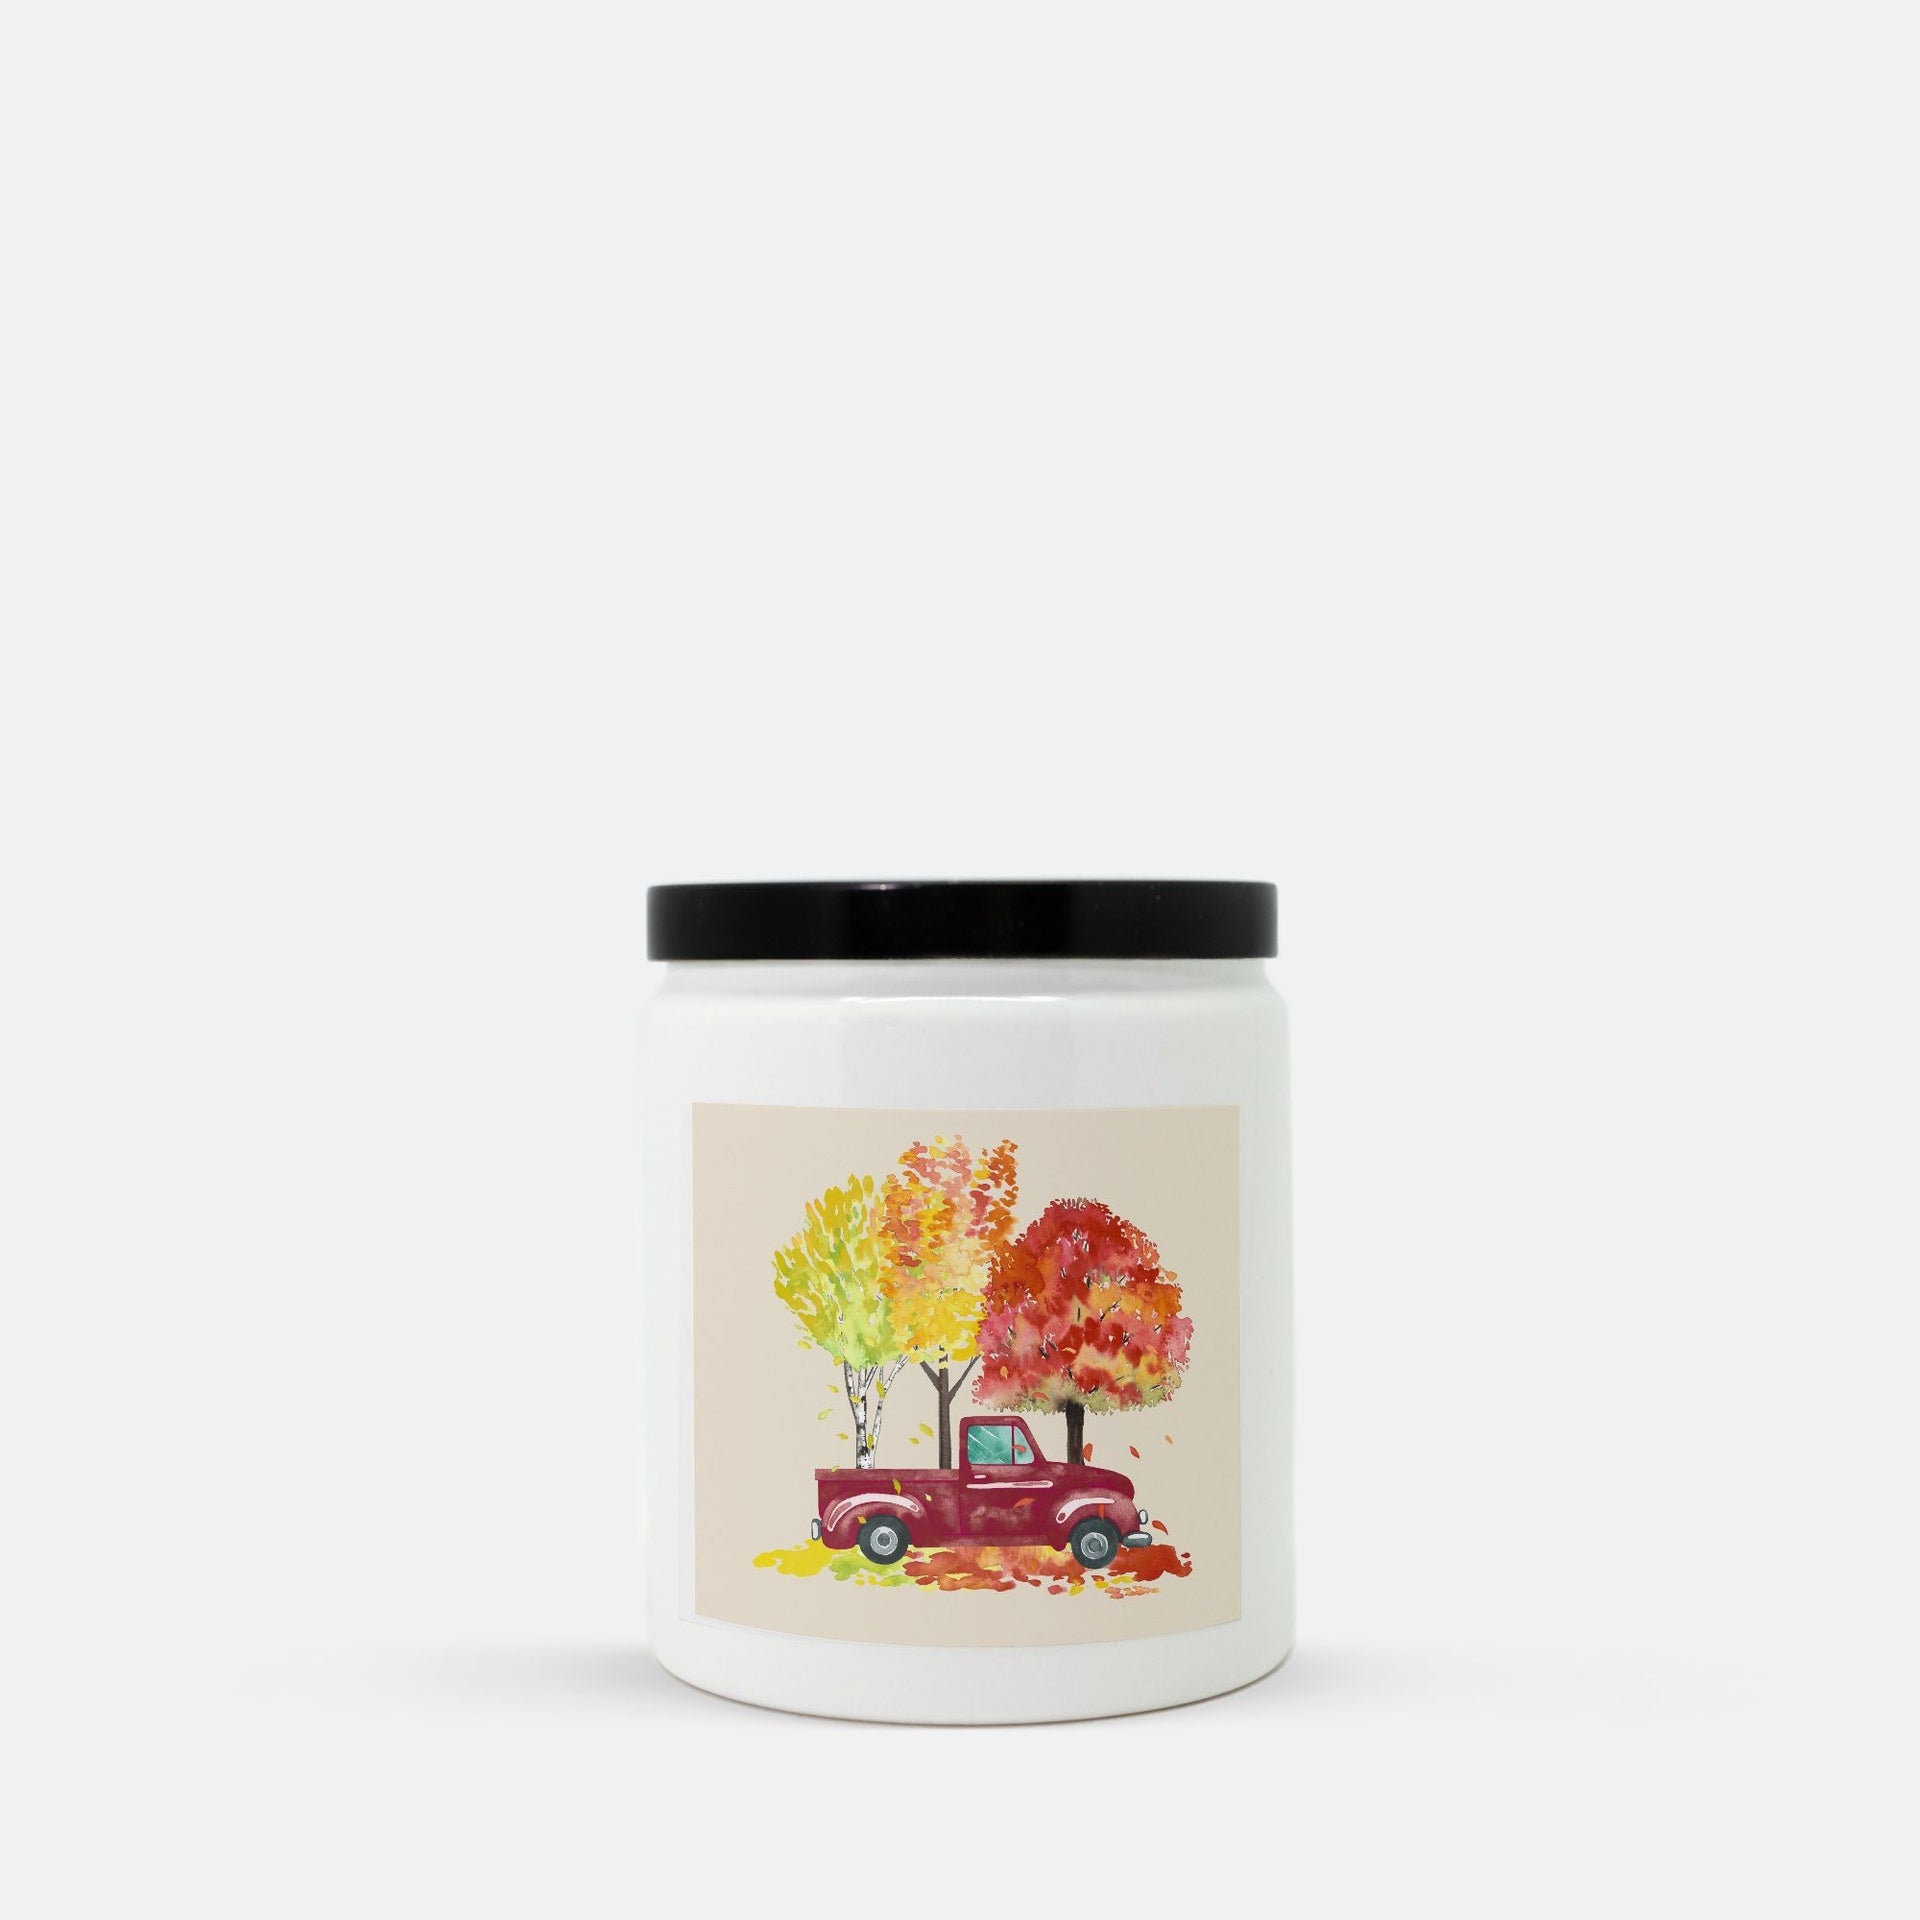 Lifestyle Details - Red Rustic Truck & Trees Ceramic Candle w Black Lid - Vanilla Bean